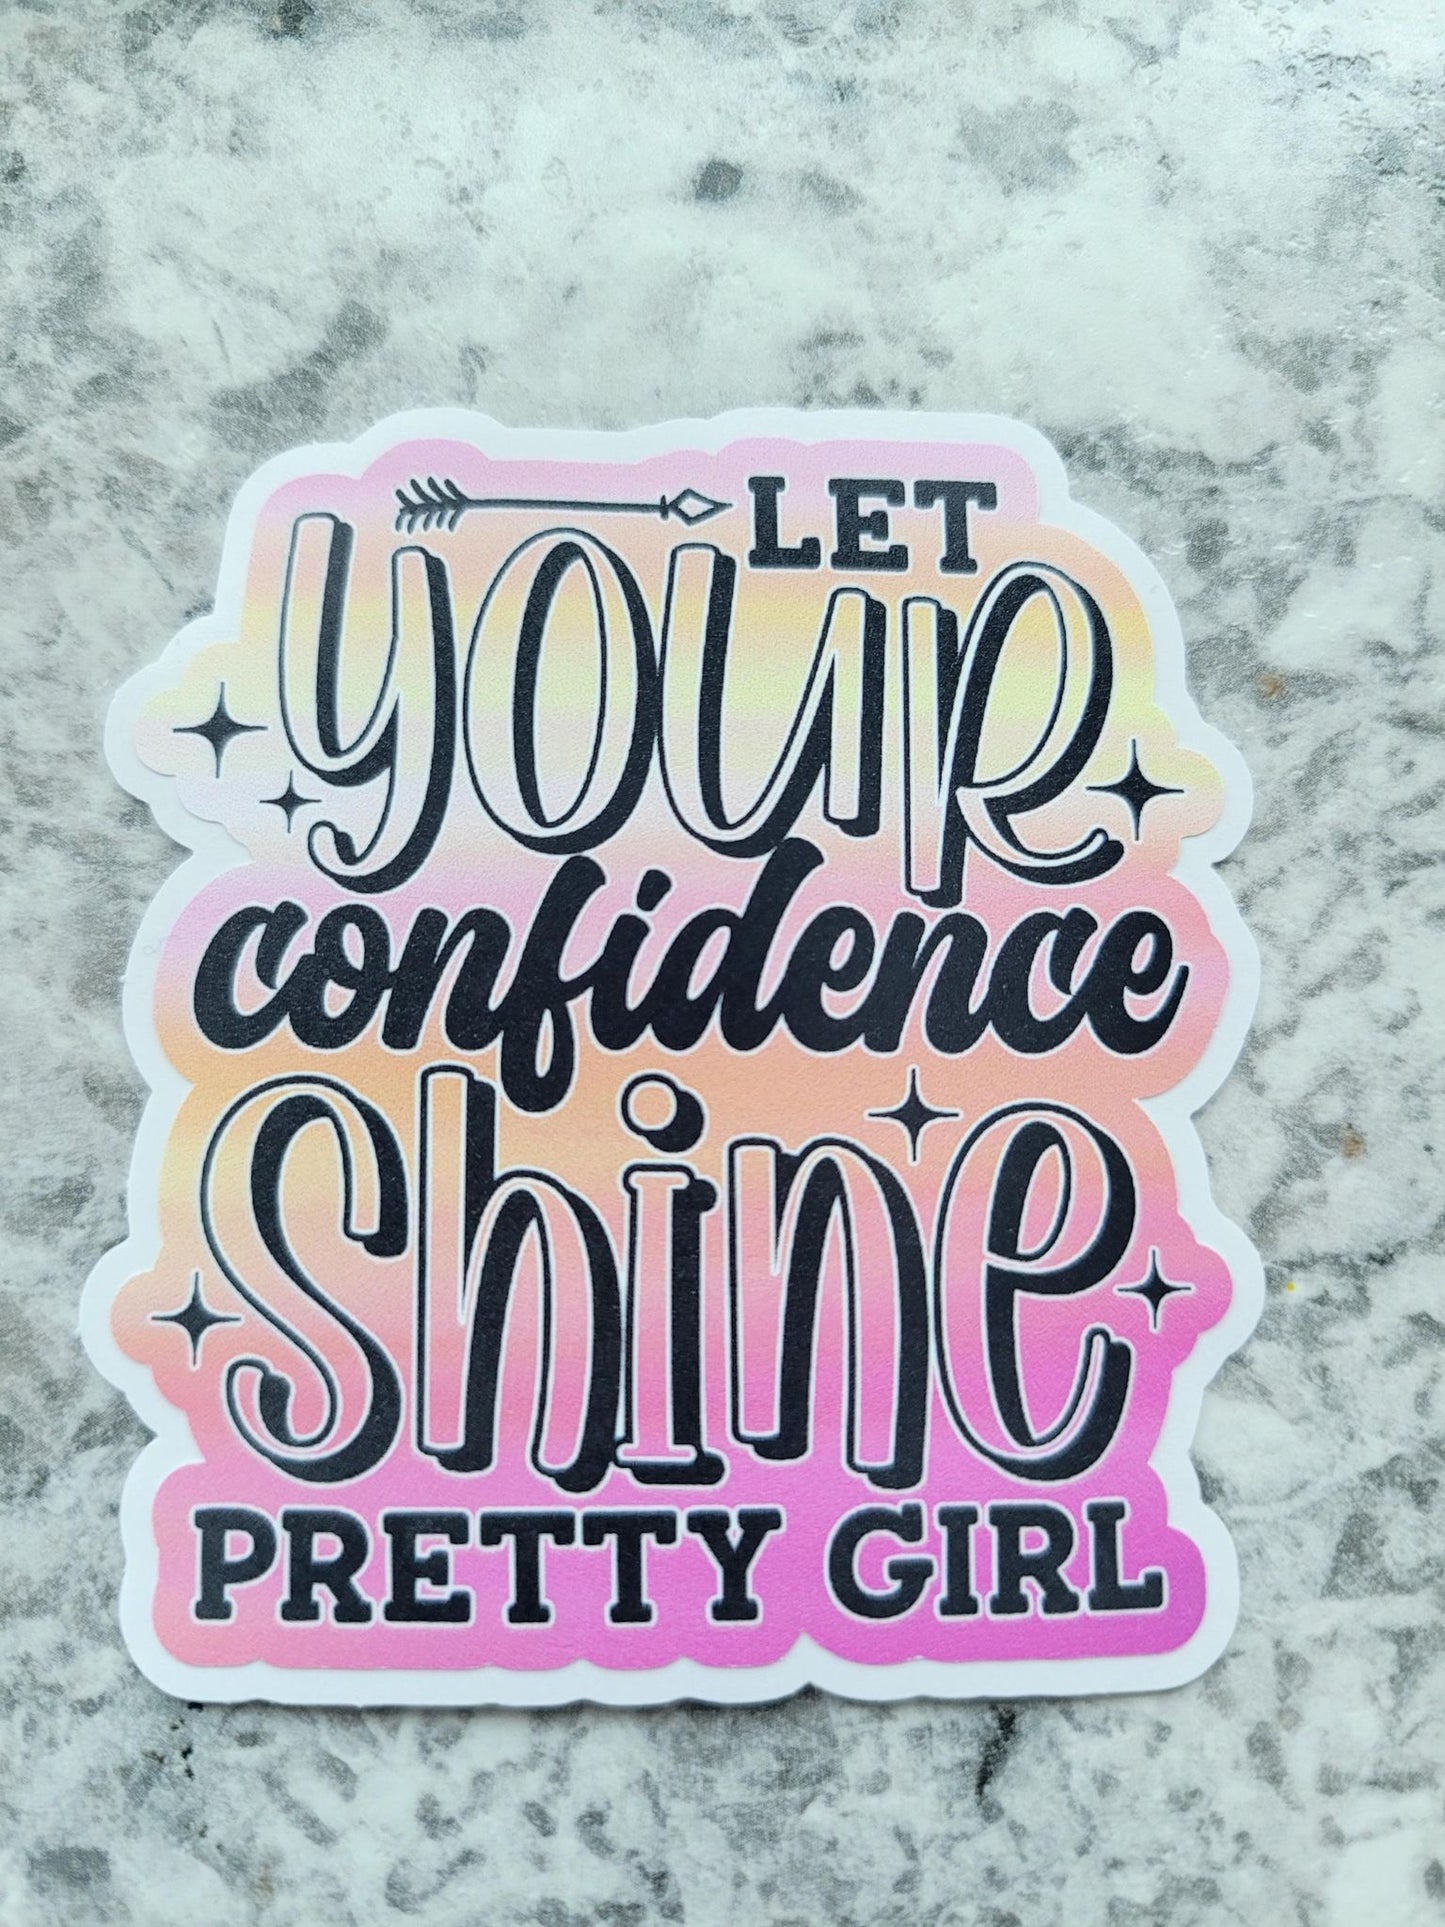 Let your confidence shine pretty girl Die cut sticker 3-5 Business Day TAT